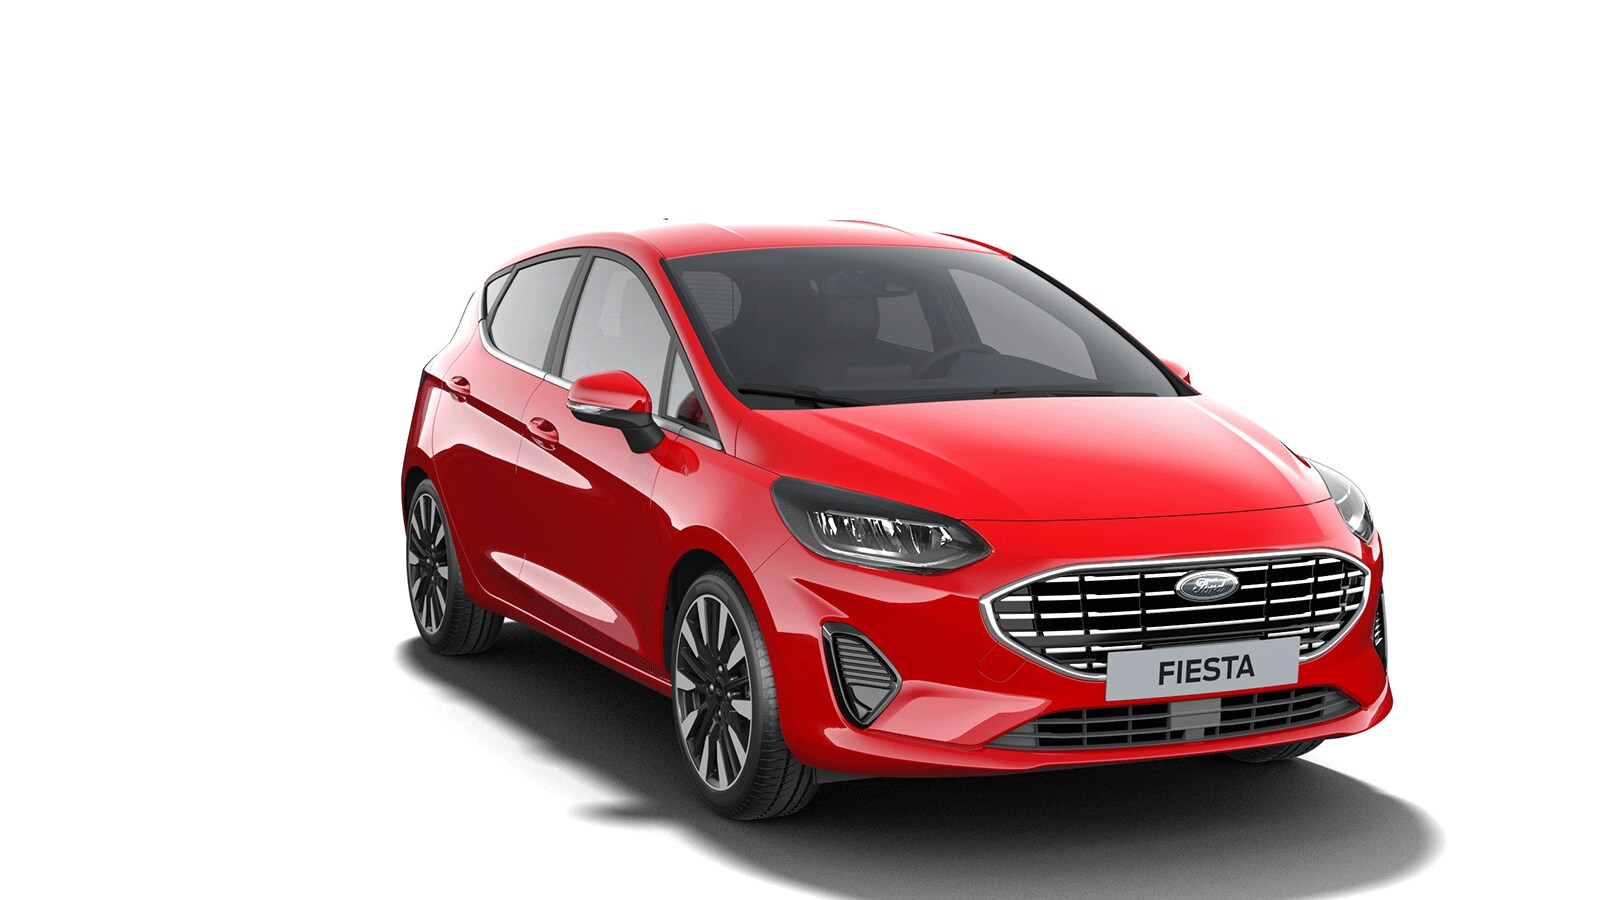 Ford Fiesta Titanium Vignale from 3/4 front angle